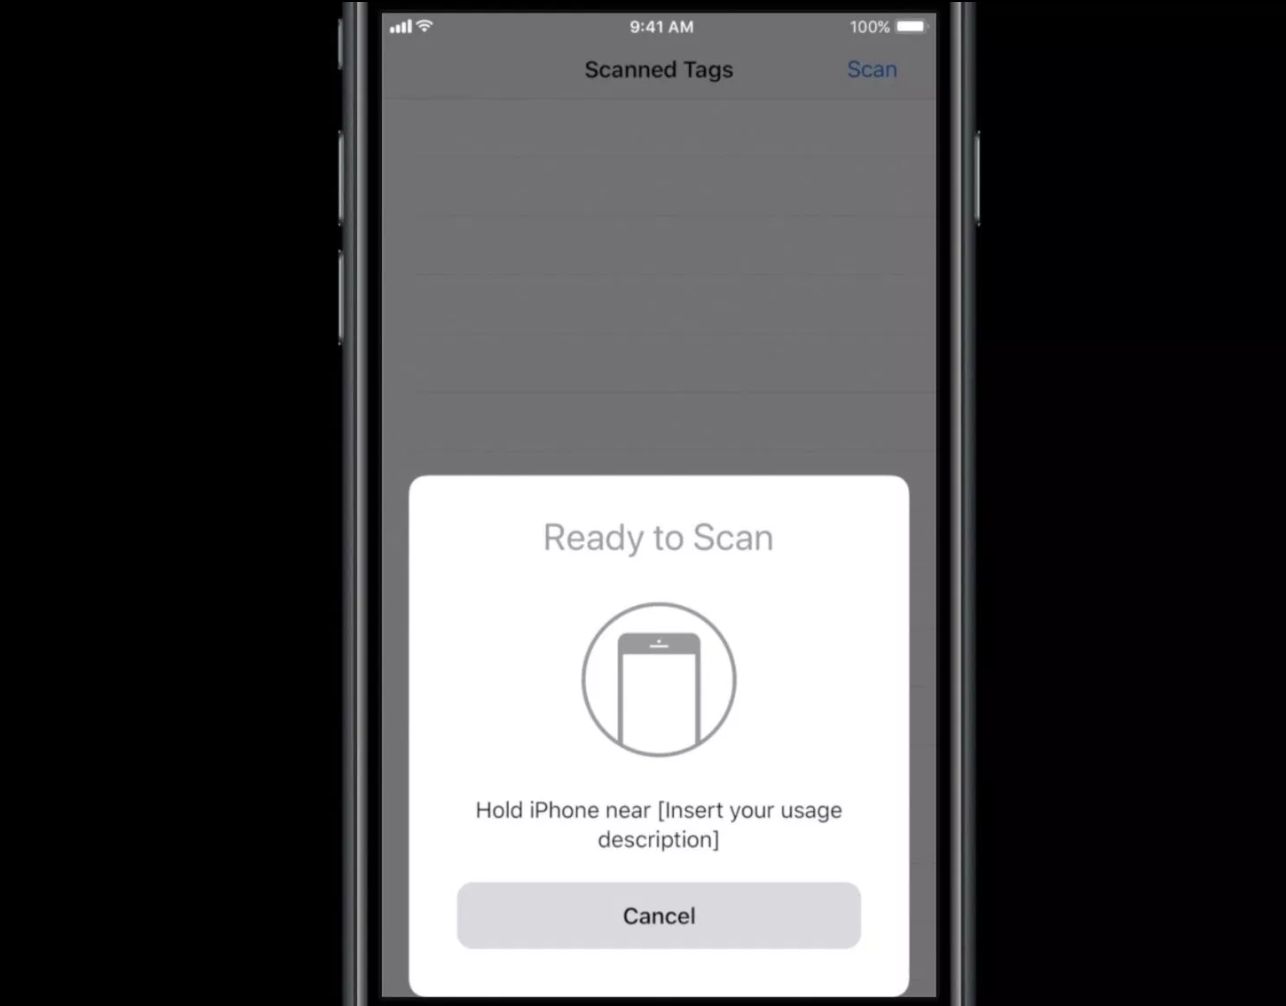 iOS 12 Will Reportedly Enable iPhones to Become Secure Hotel Room Keys